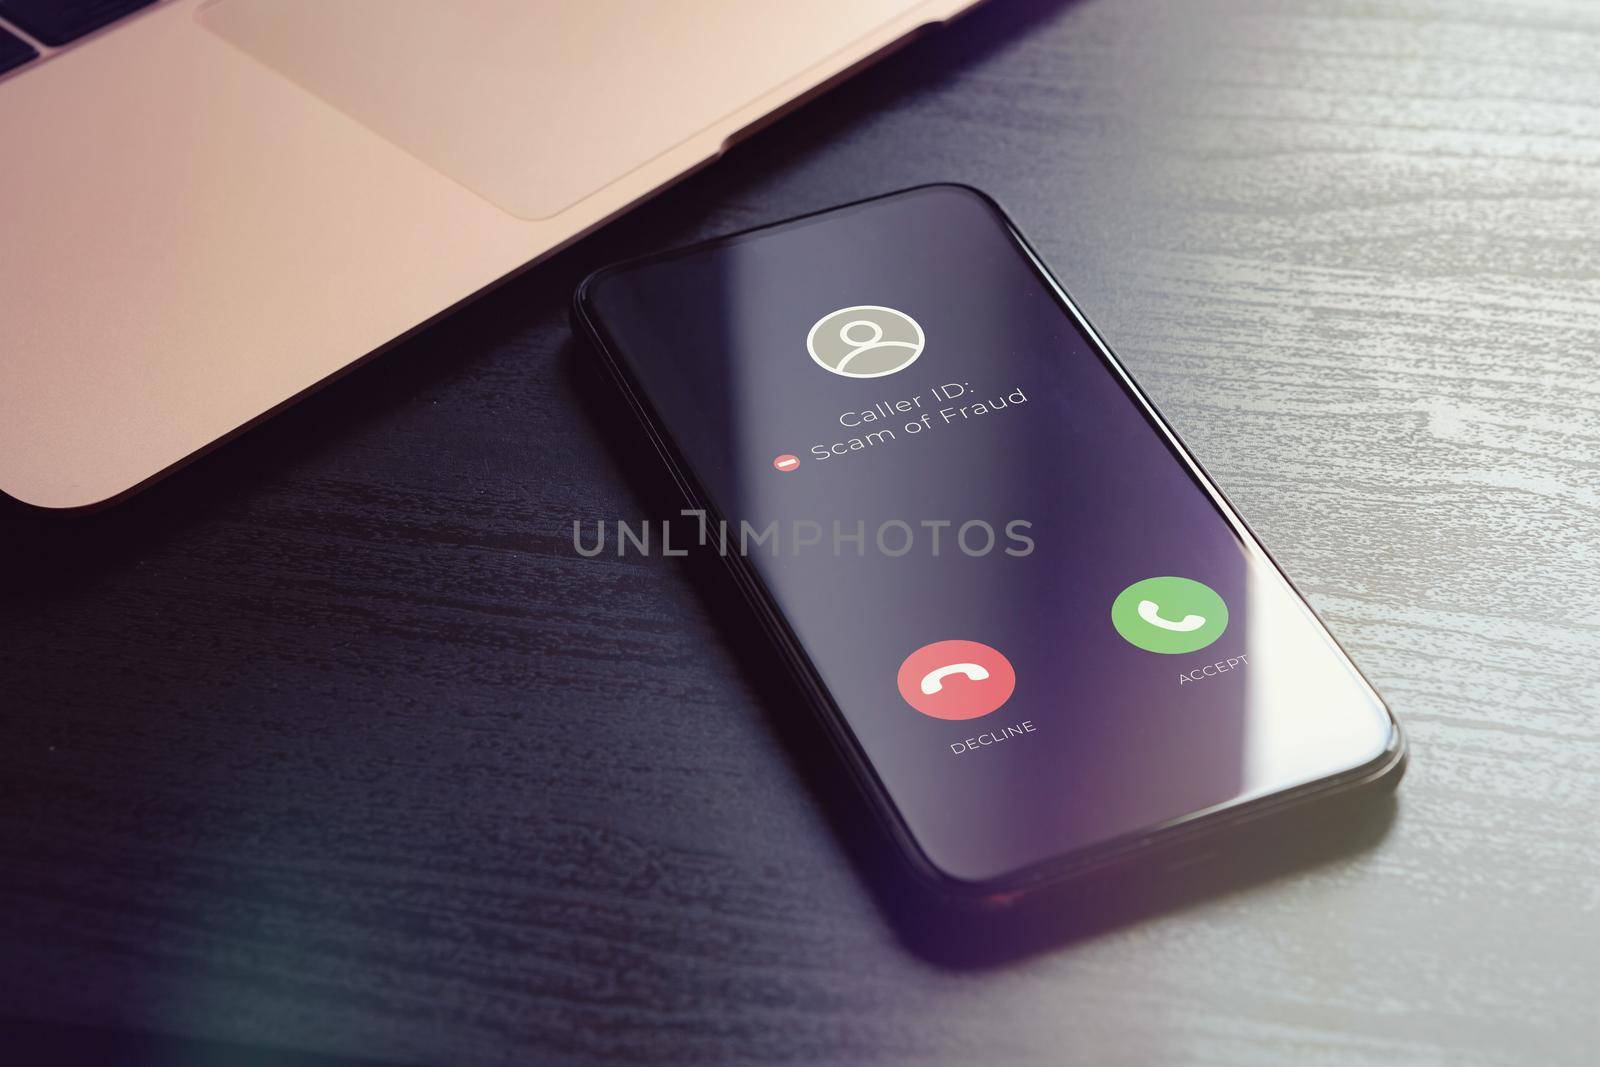 Scam fishing phone call from unknown number that was identified by a security anti-scam app as alert and fraudulent. Block Scam and Unwanted Calls concept by bestforbest